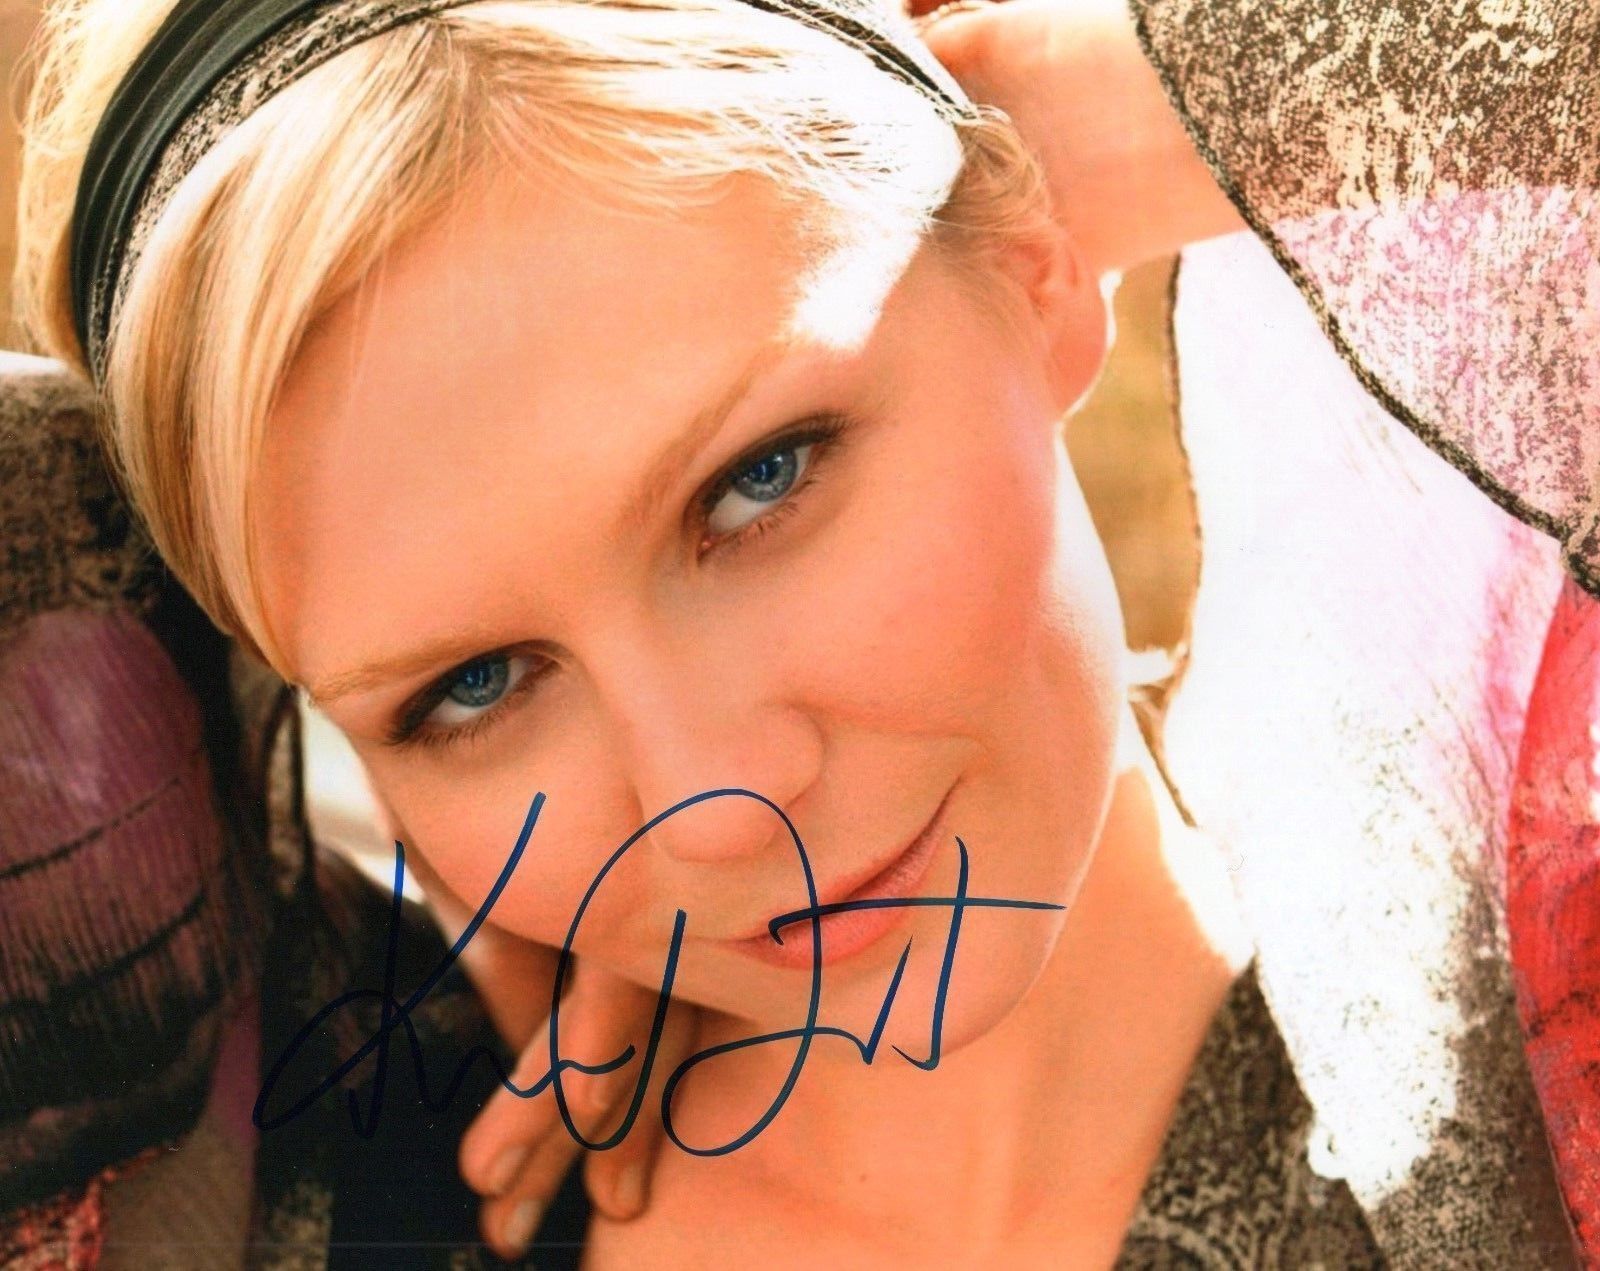 KIRSTEN DUNST AUTOGRAPHED SIGNED A4 PP POSTER Photo Poster painting PRINT 16